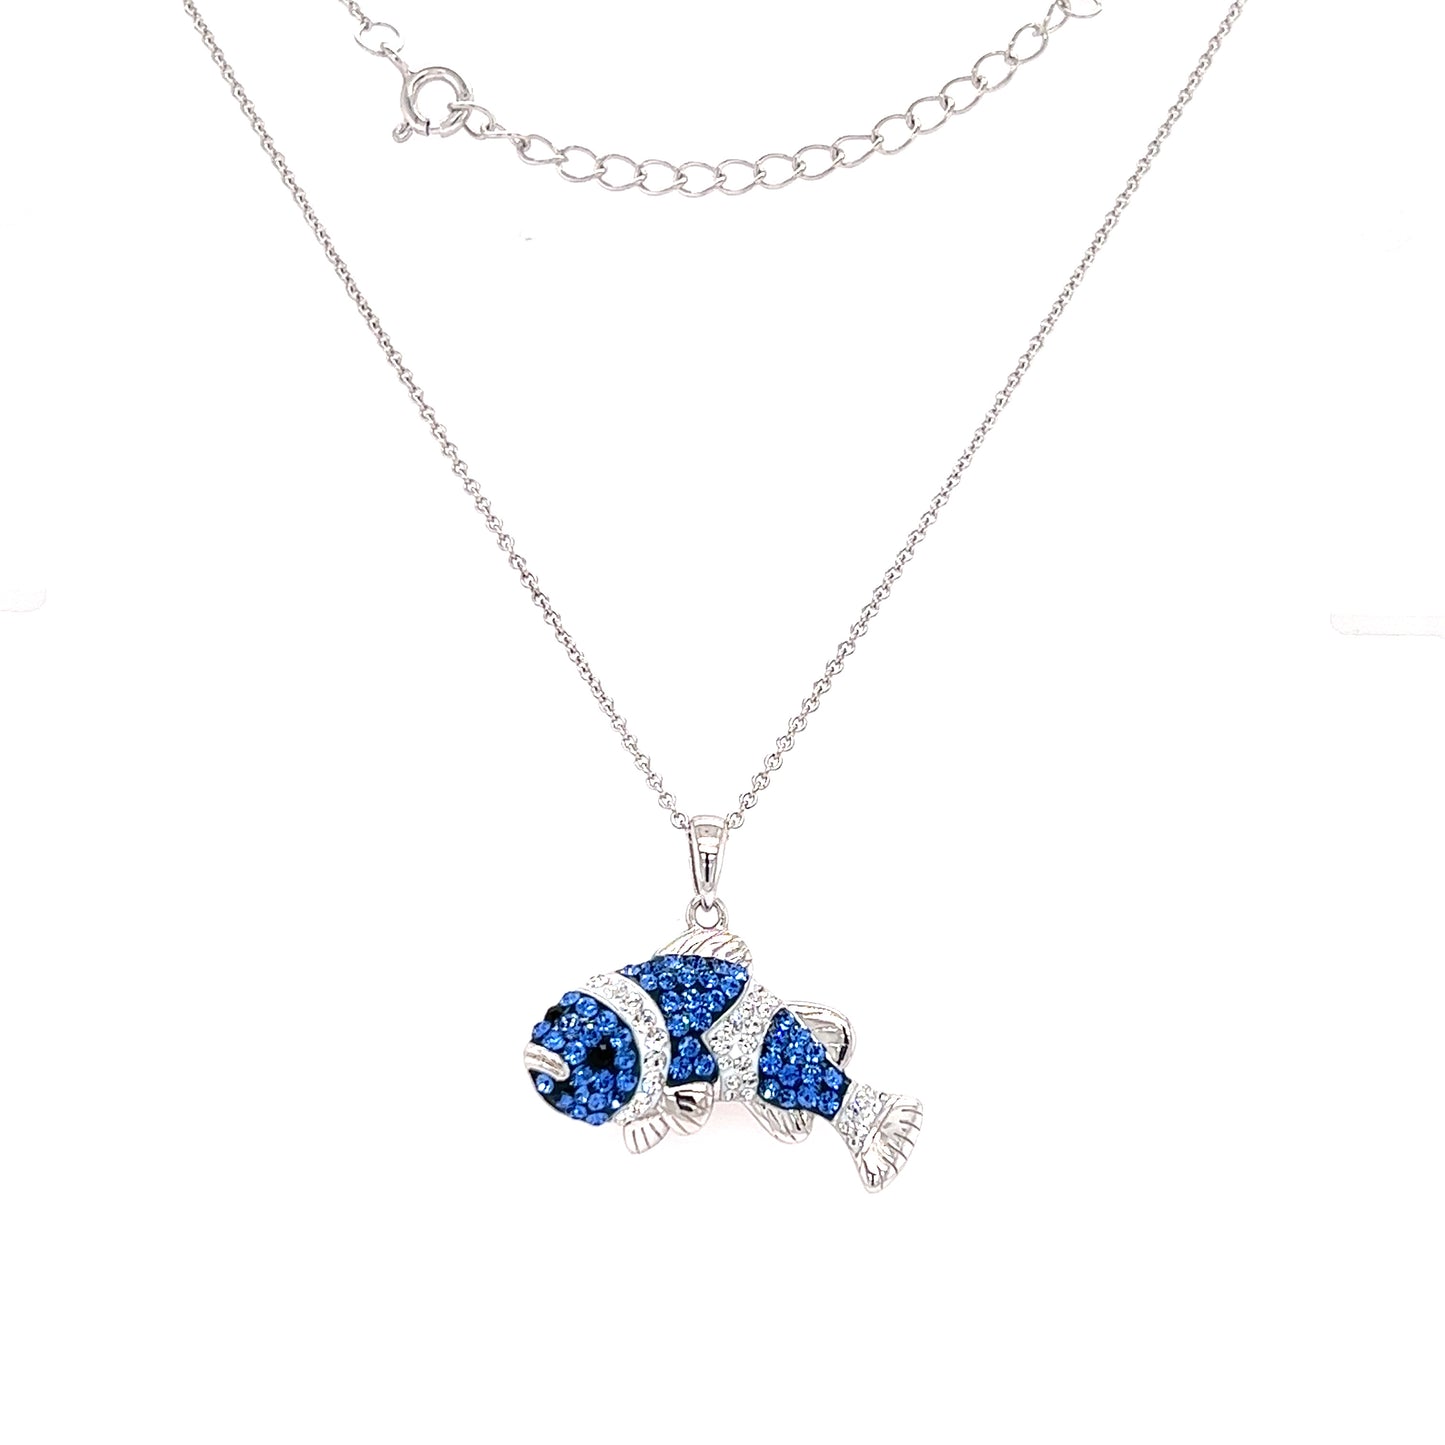 Clownfish Necklace with Blue and White Crystals in Sterling Silver Full Necklace Front View